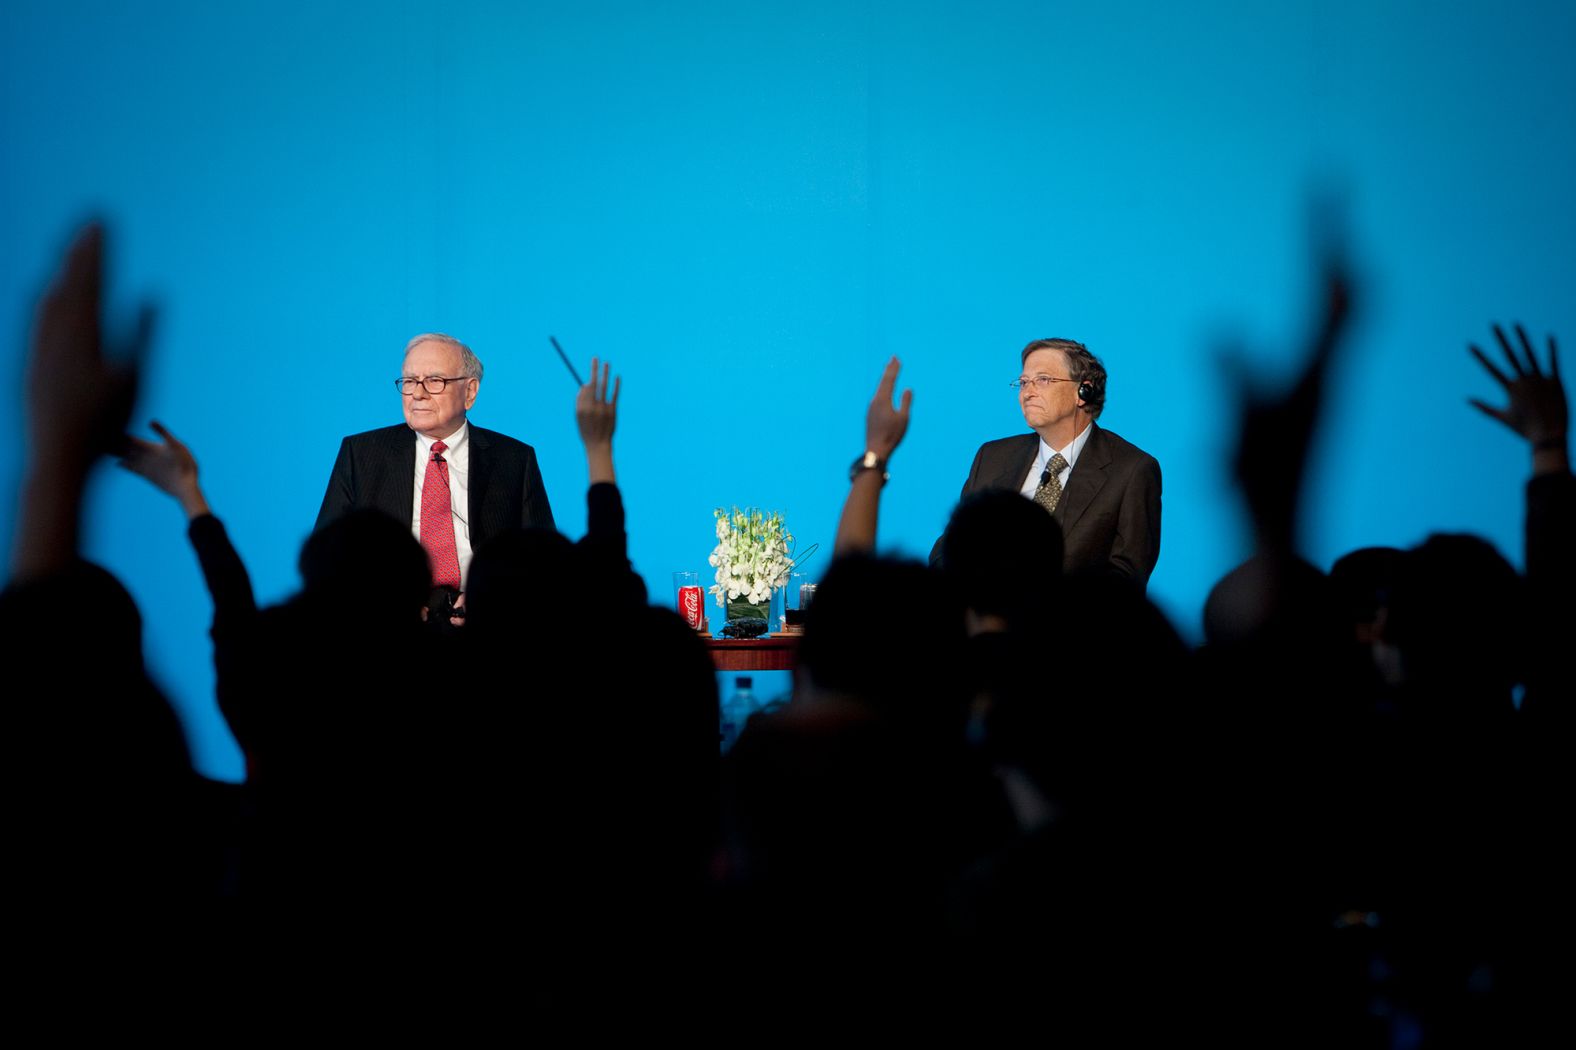 Gates and <a href="http://www.cnn.com/2020/08/30/us/gallery/warren-buffett-life-in-pictures/index.html" target="_blank">Warren Buffett</a>, the chairman of Berkshire Hathaway Inc., take questions at a news conference in Beijing in 2010. That year, the two launched The Giving Pledge, which encourages the world's billionaires to dedicate the majority of their wealth to philanthropic causes.